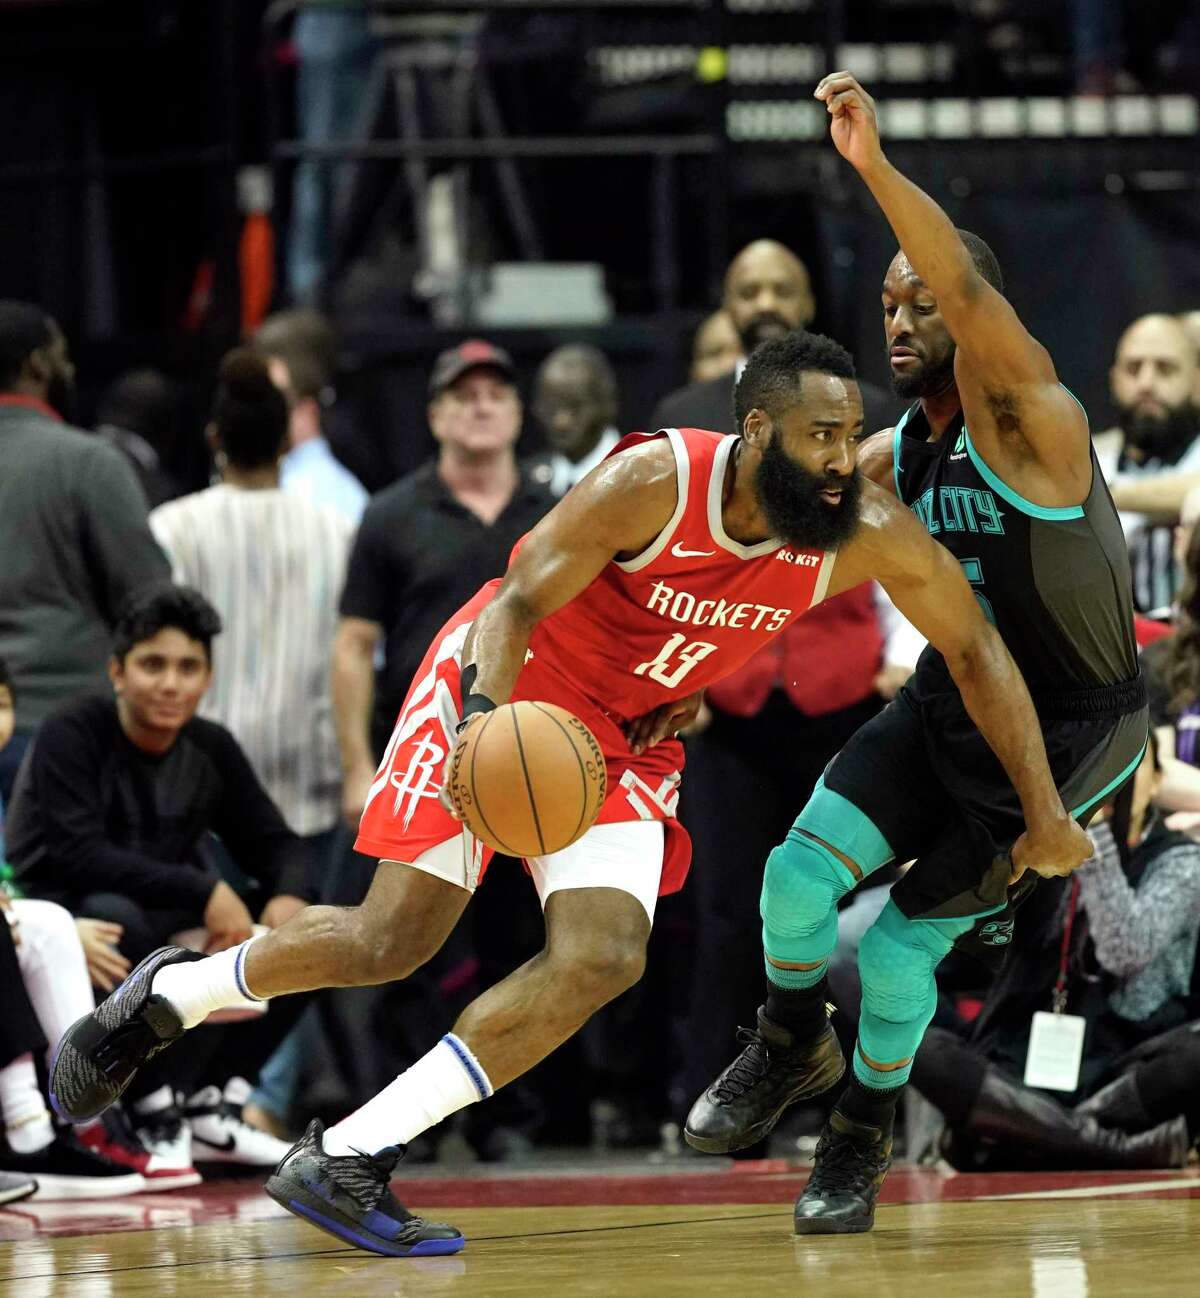 Houston Rockets' James Harden (13) drives toward the basket as Charlotte Hornets' Kemba Walker defends during the first half of an NBA basketball game Monday, March 11, 2019, in Houston. (AP Photo/David J. Phillip)